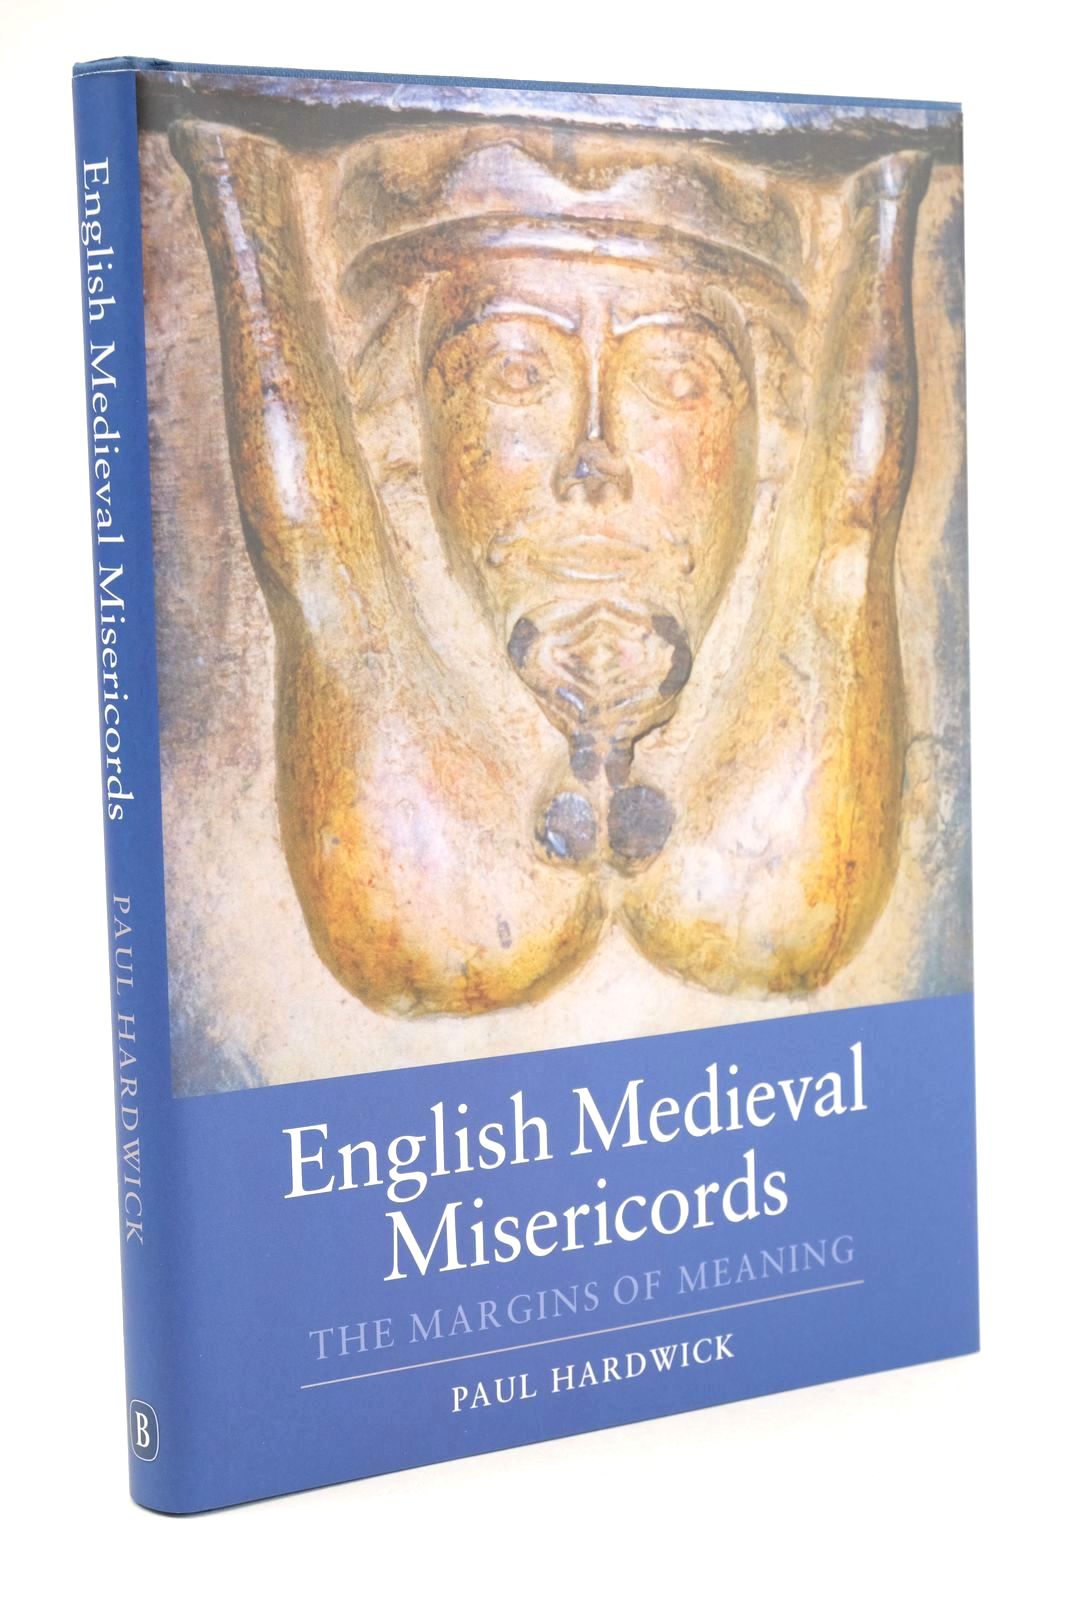 Photo of ENGLISH MEDIEVAL MISERICORDS - THE MARGINS OF MEANING written by Hardwick, Paul published by The Boydell Press (STOCK CODE: 1325296)  for sale by Stella & Rose's Books